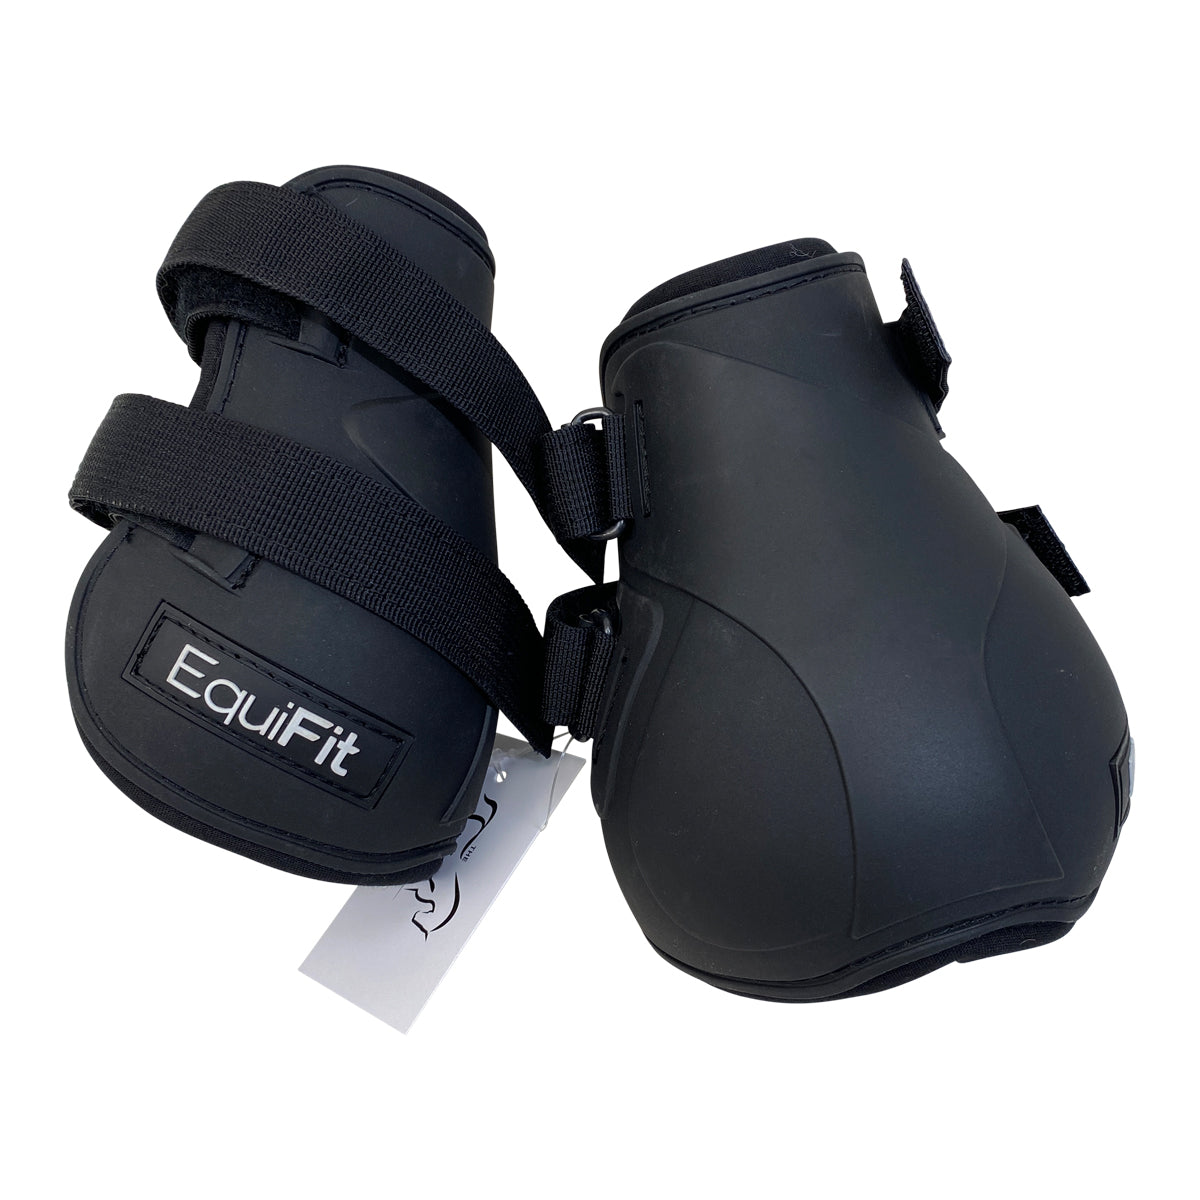 Equifit 'ProLete' Hind Boots in Black